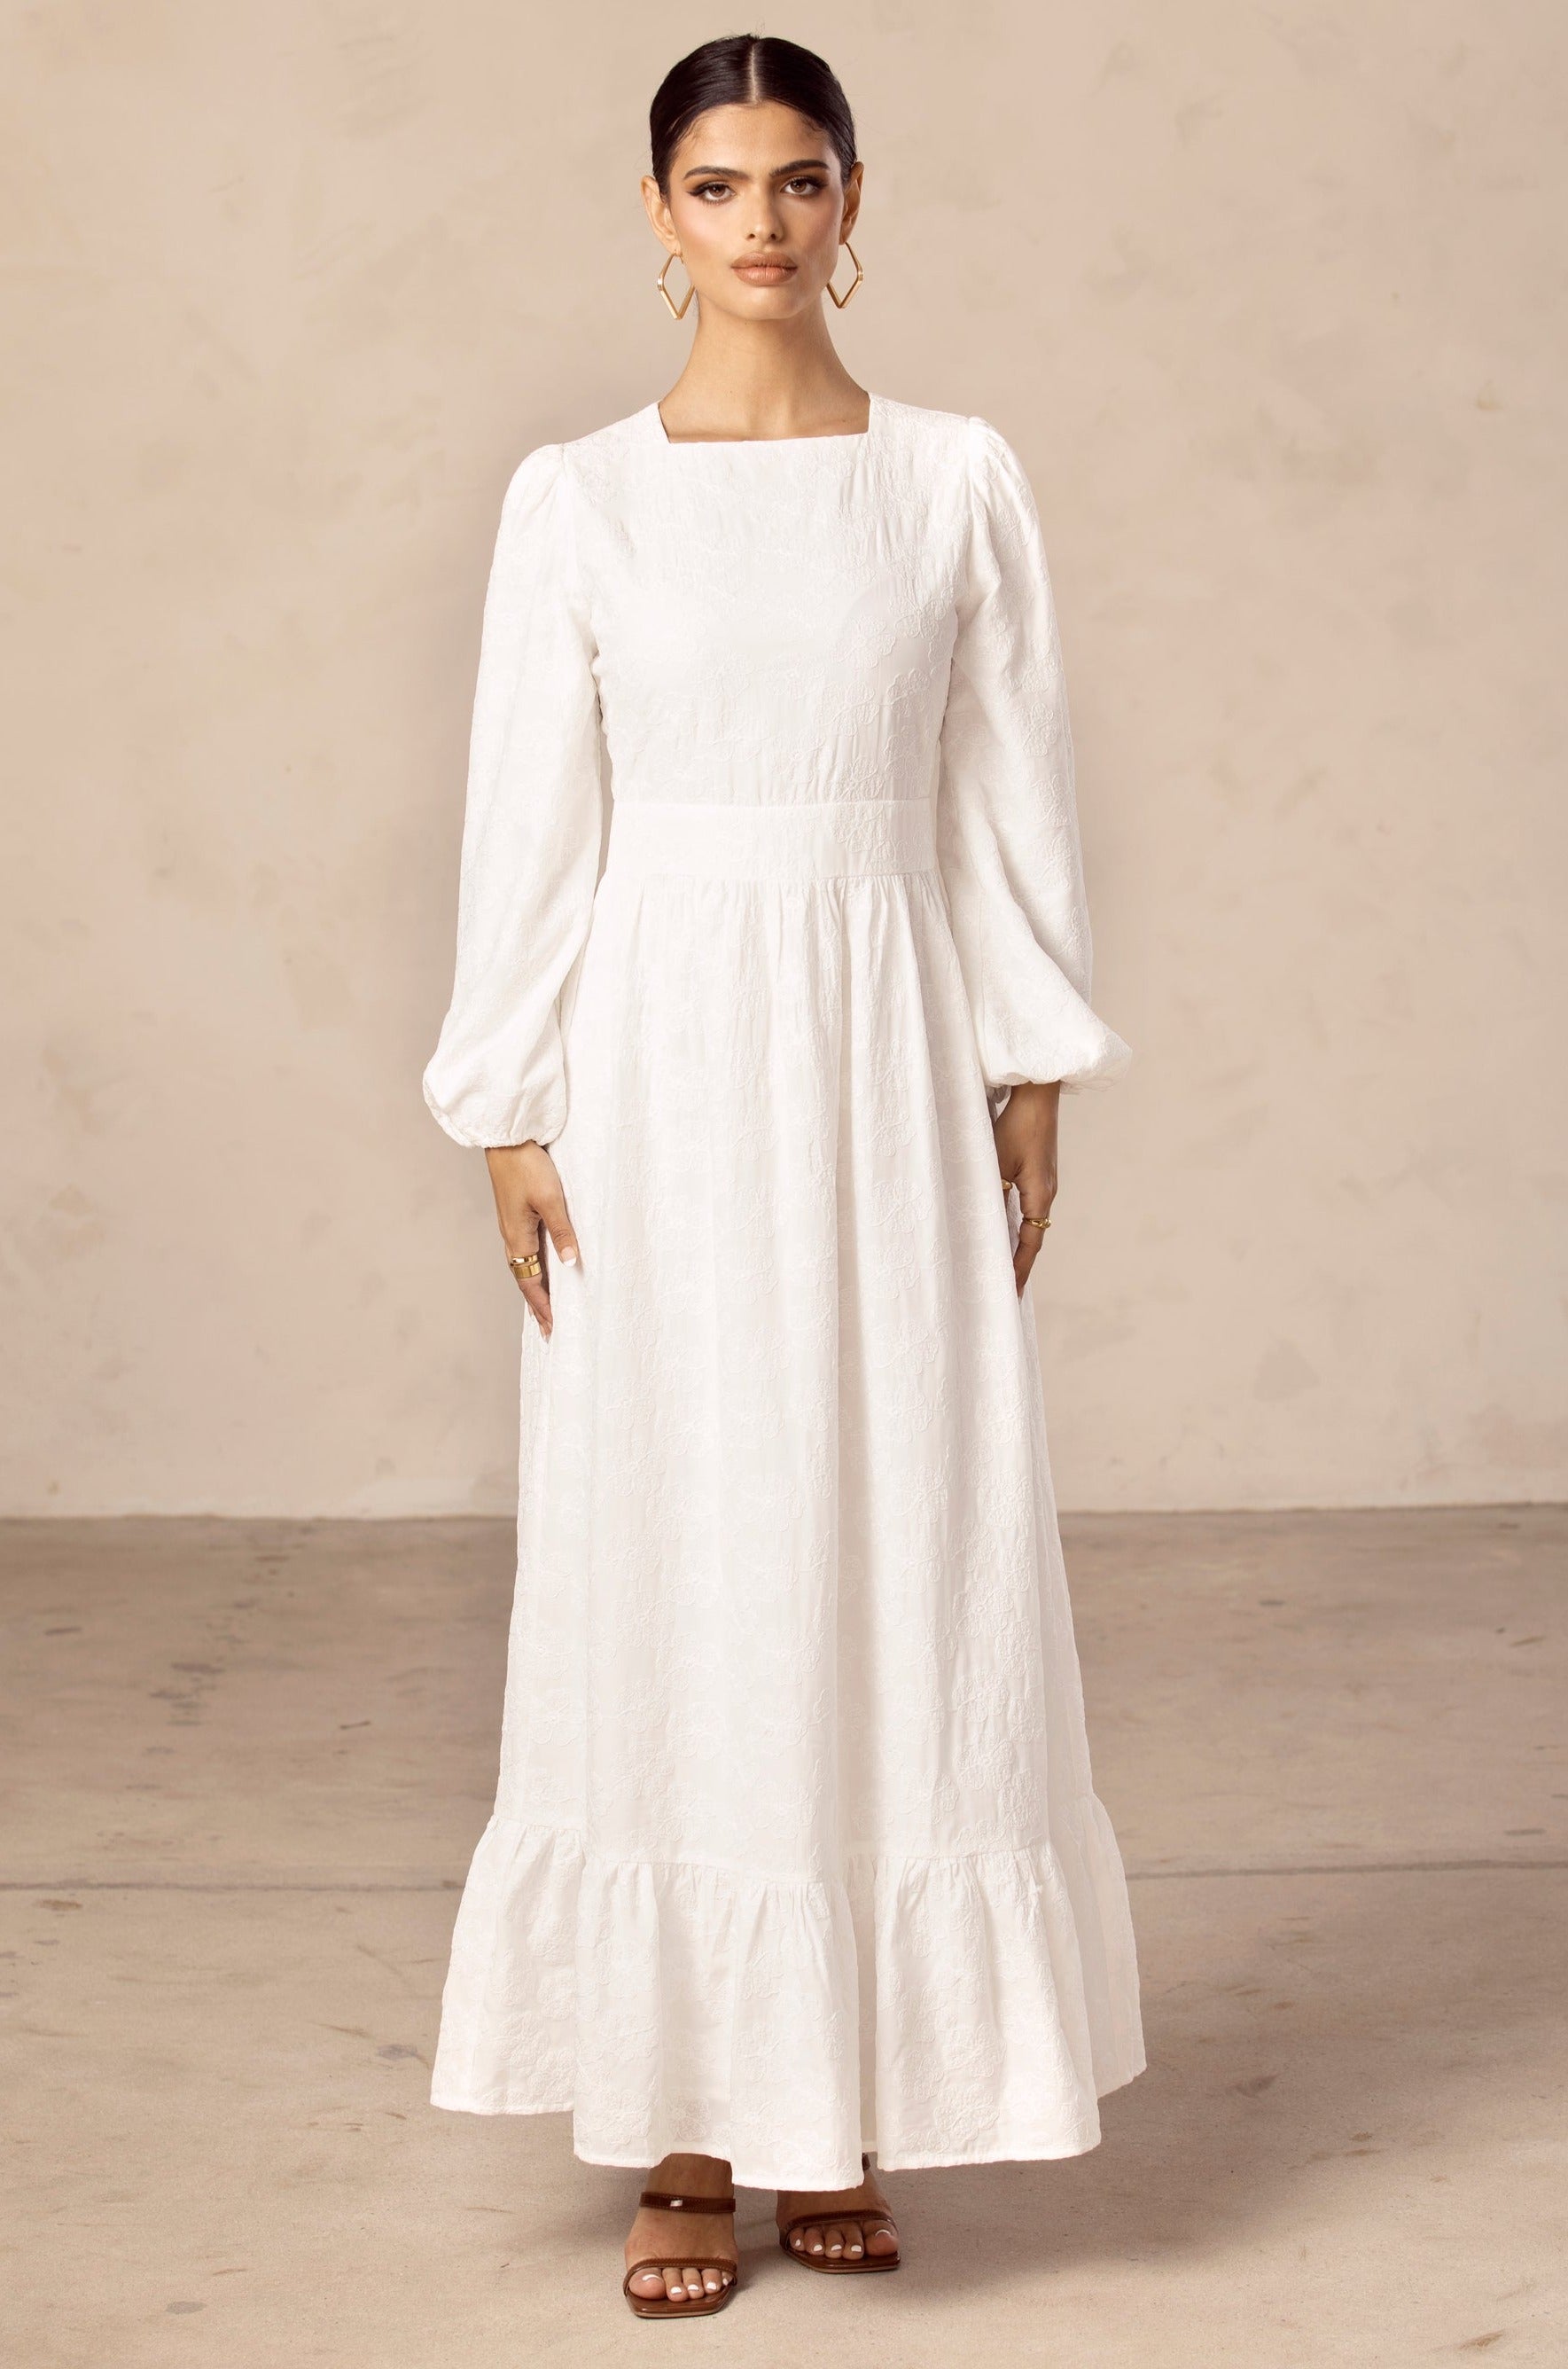 Emilie White Floral Maxi Dress Veiled Collection 